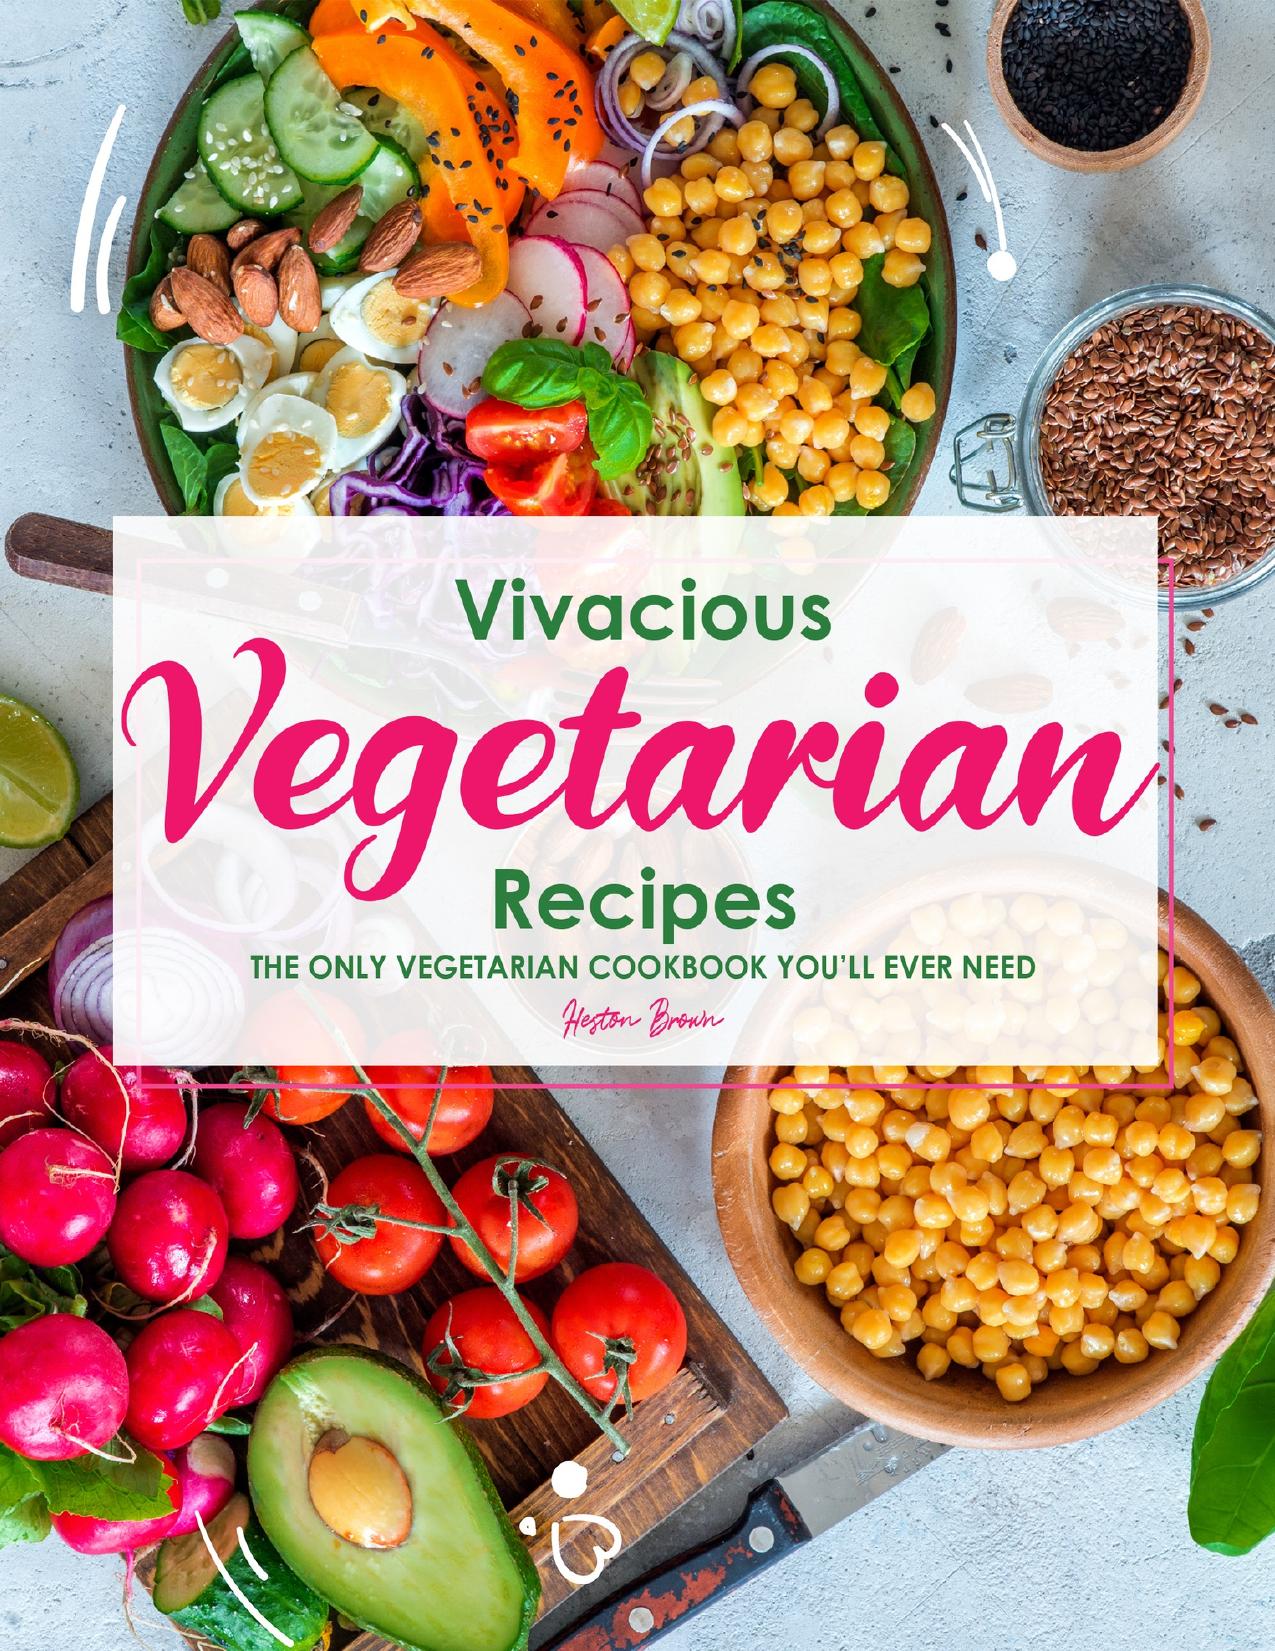 Vivacious Vegetarian Recipes: The Only Vegetarian Cookbook You'll Ever Need by Brown Heston